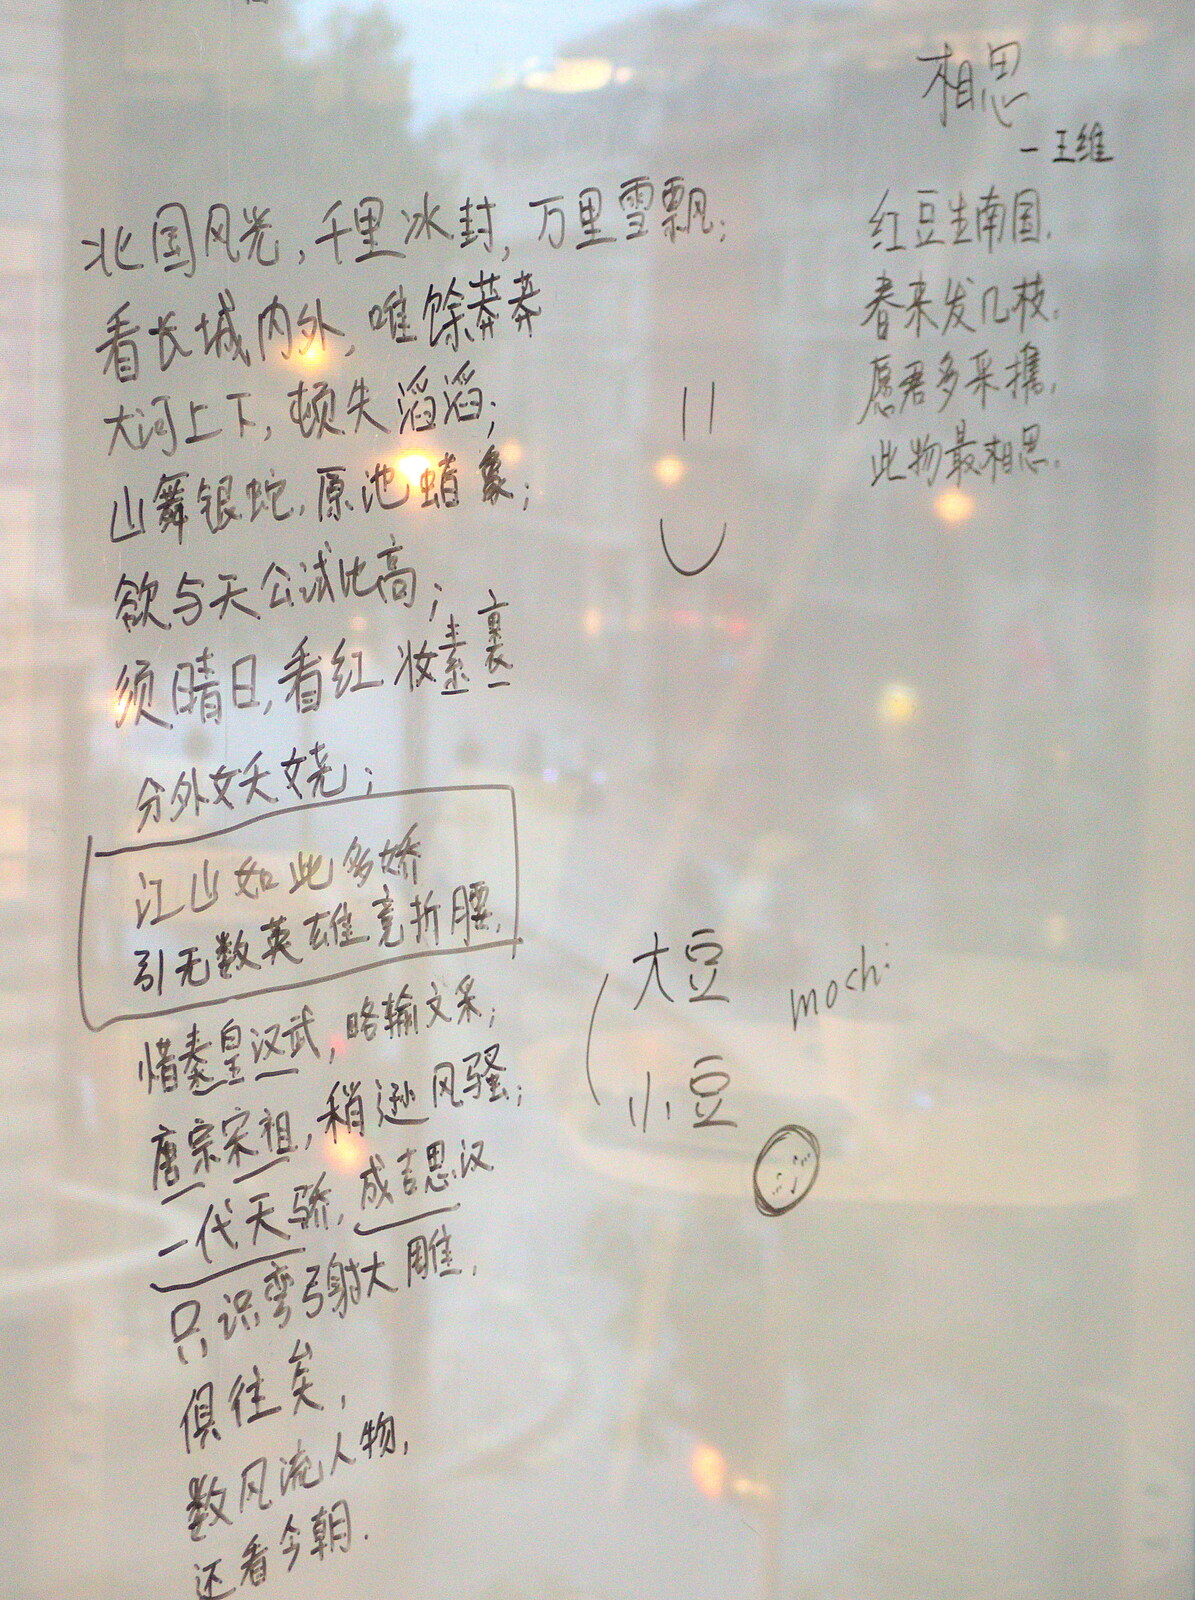 Some Chinese scribbling from SwiftKey Innovation Days, The Haymarket, London - 27th June 2014